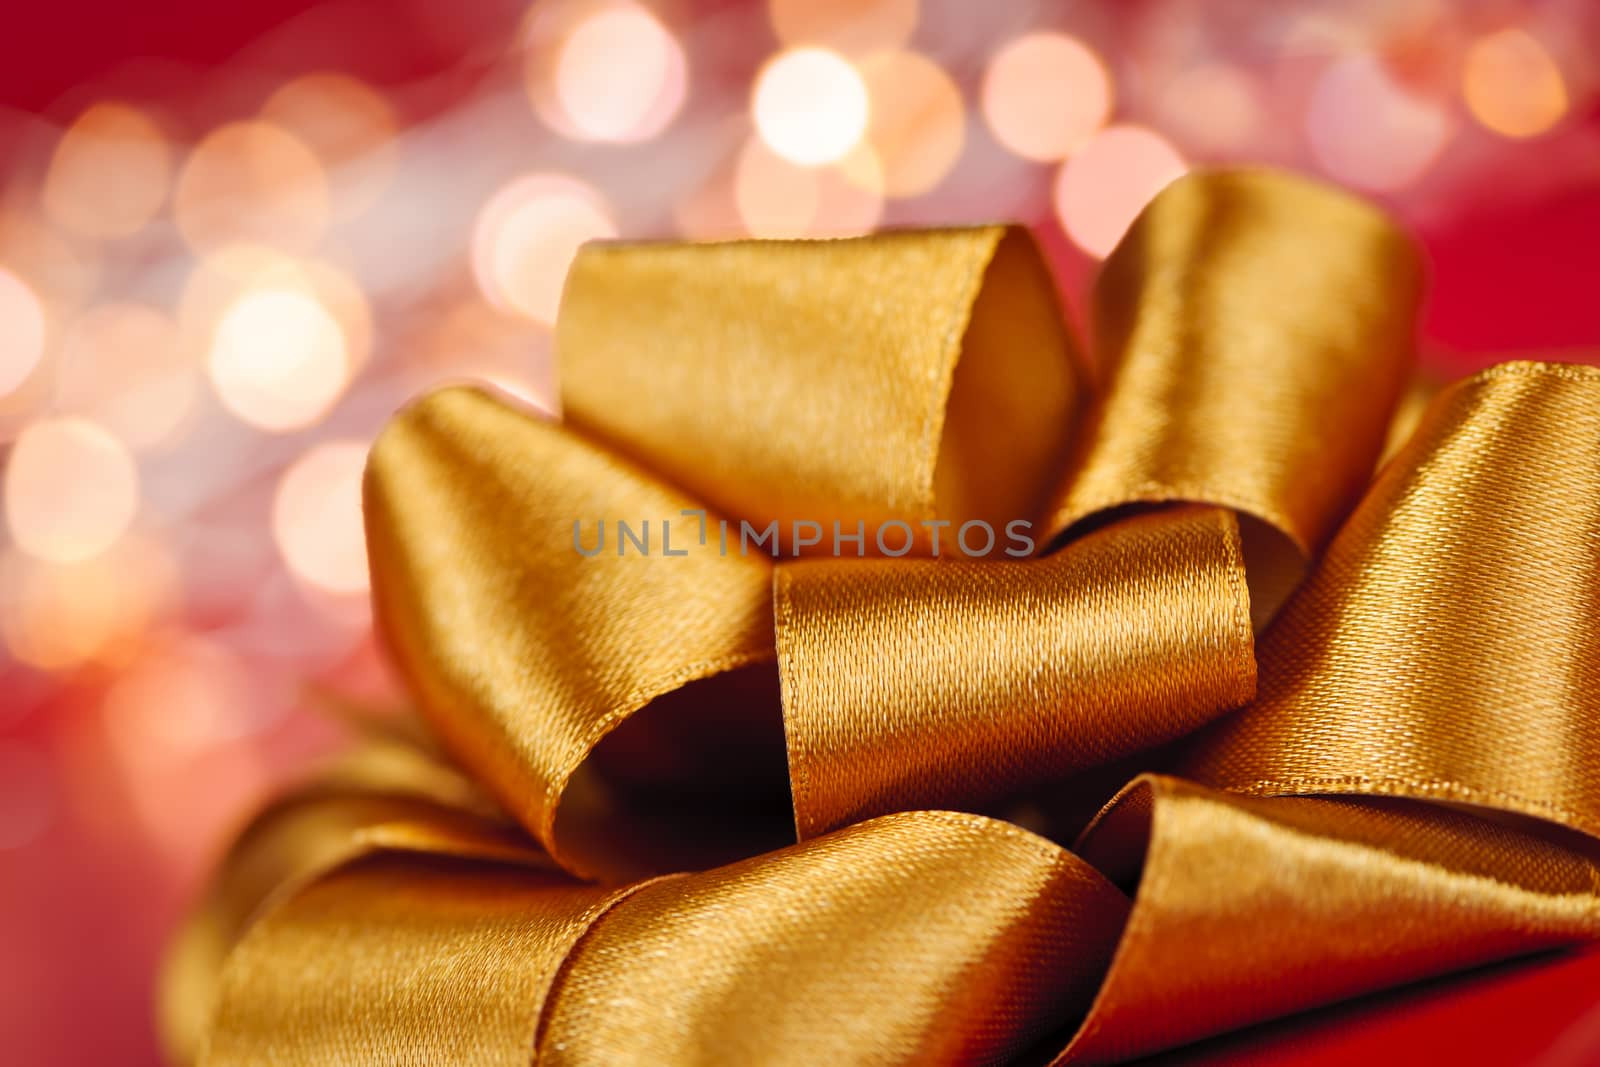 Golden ribbon gift bow closeup with festive lights